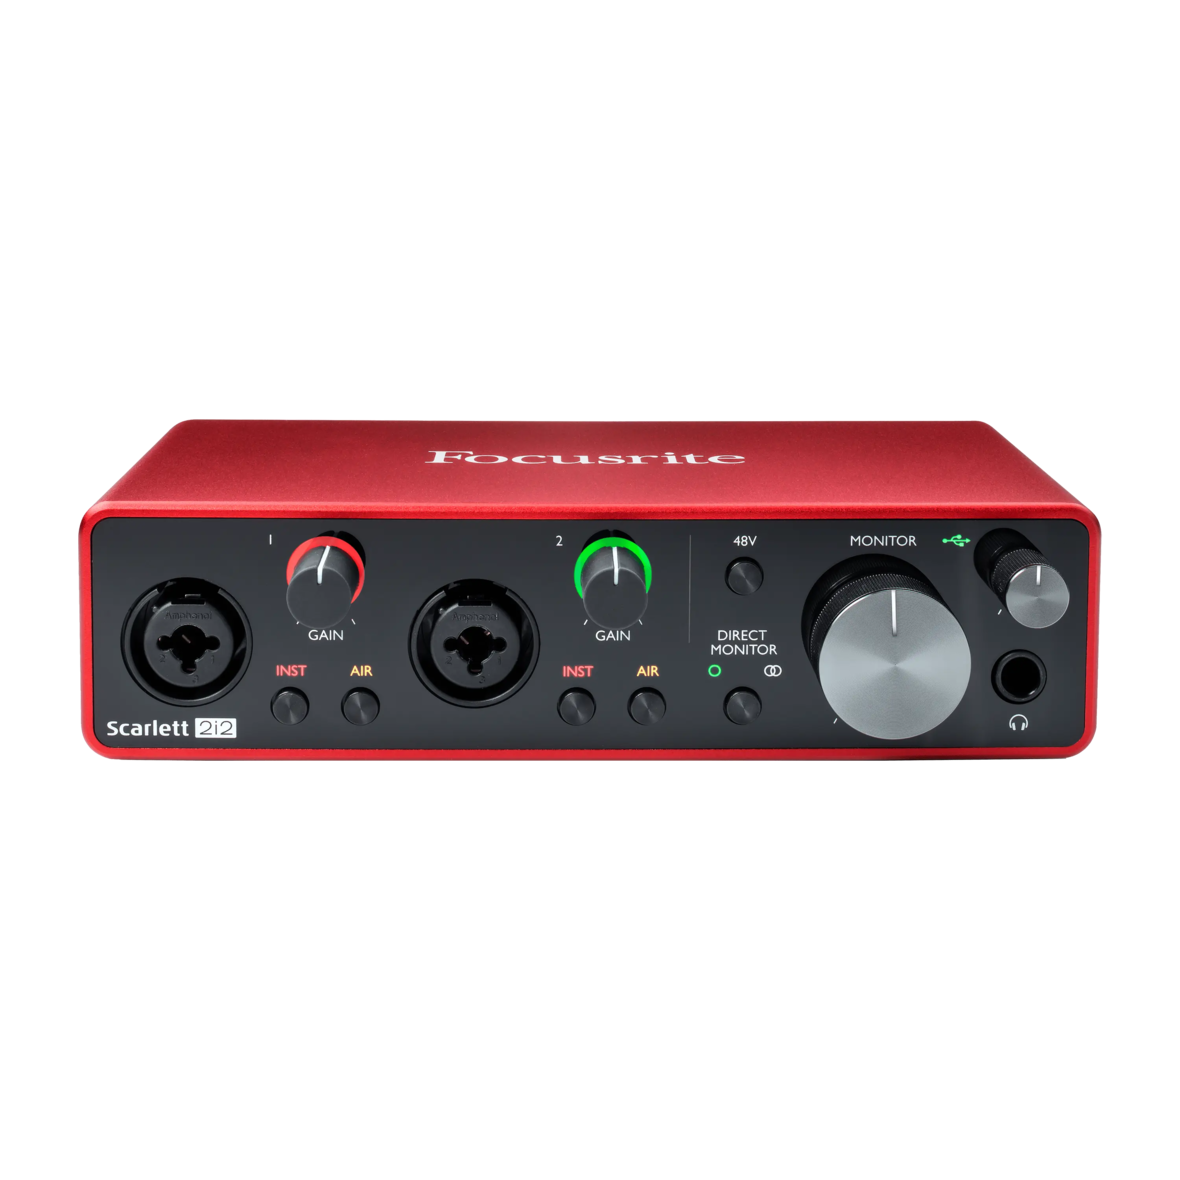 Shure SM-7B Podcasting Microphone Kit with Focusrite Scarlett